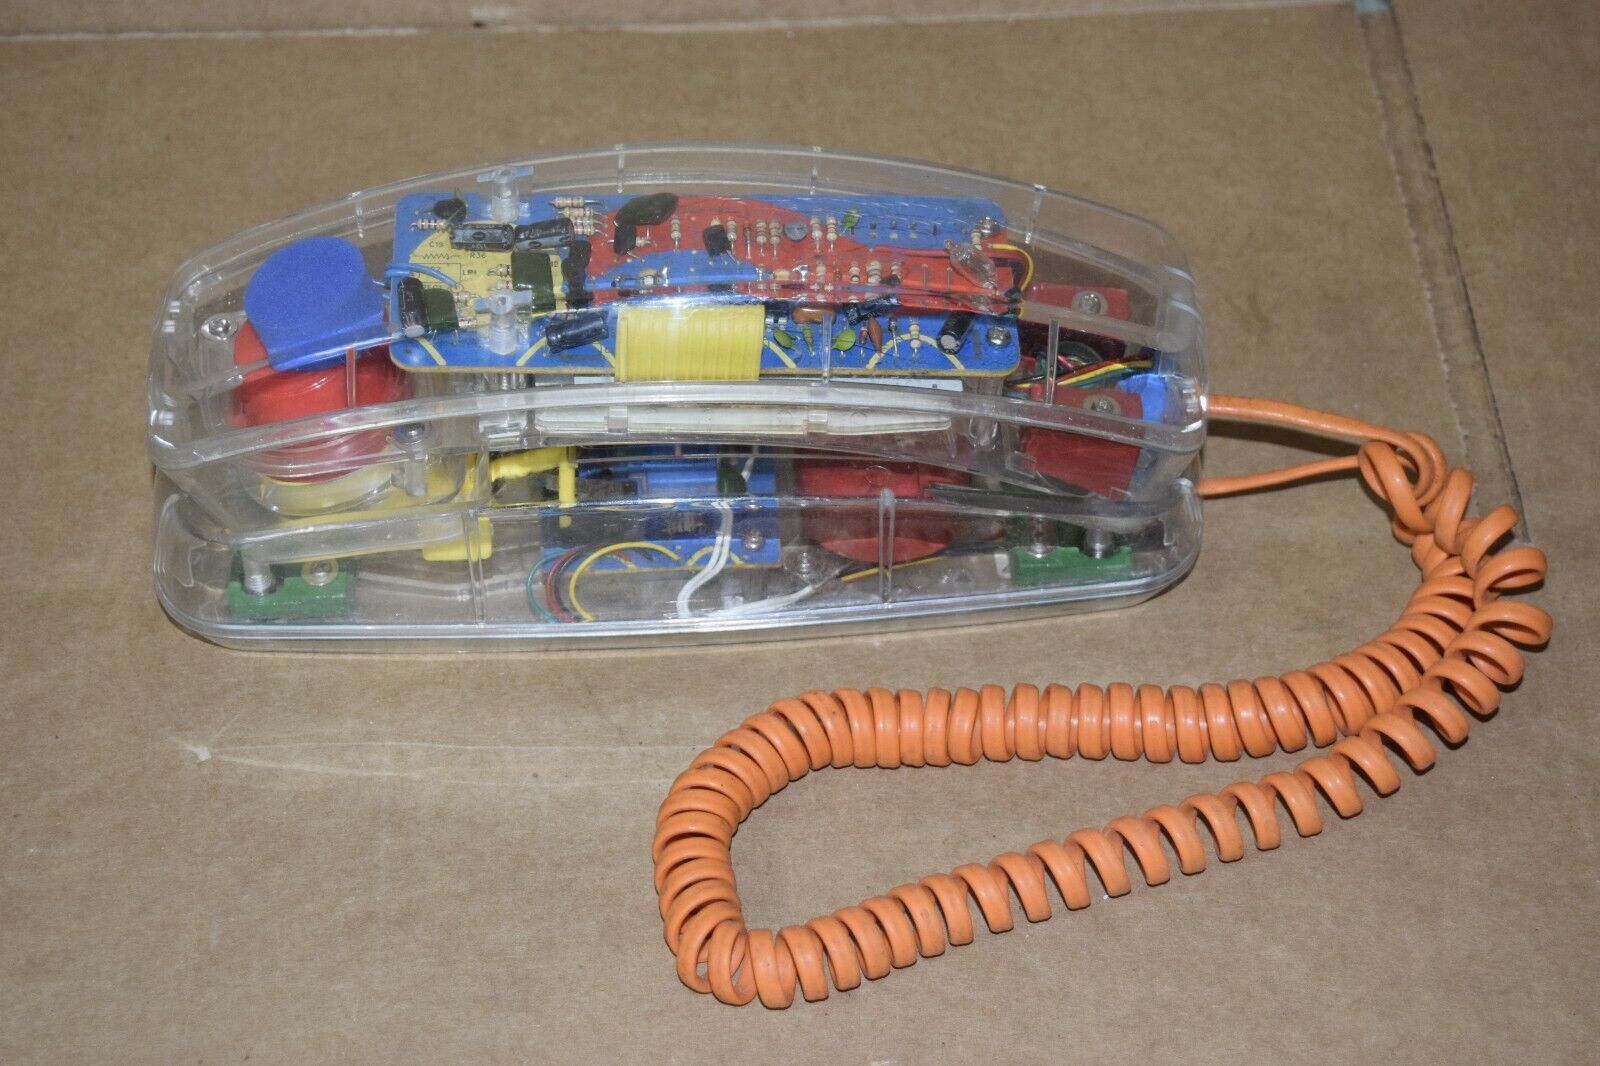 Vintage Conair Phone Clear Touch-Tone Telephone 80's Colors w/ Rare Orange Cord